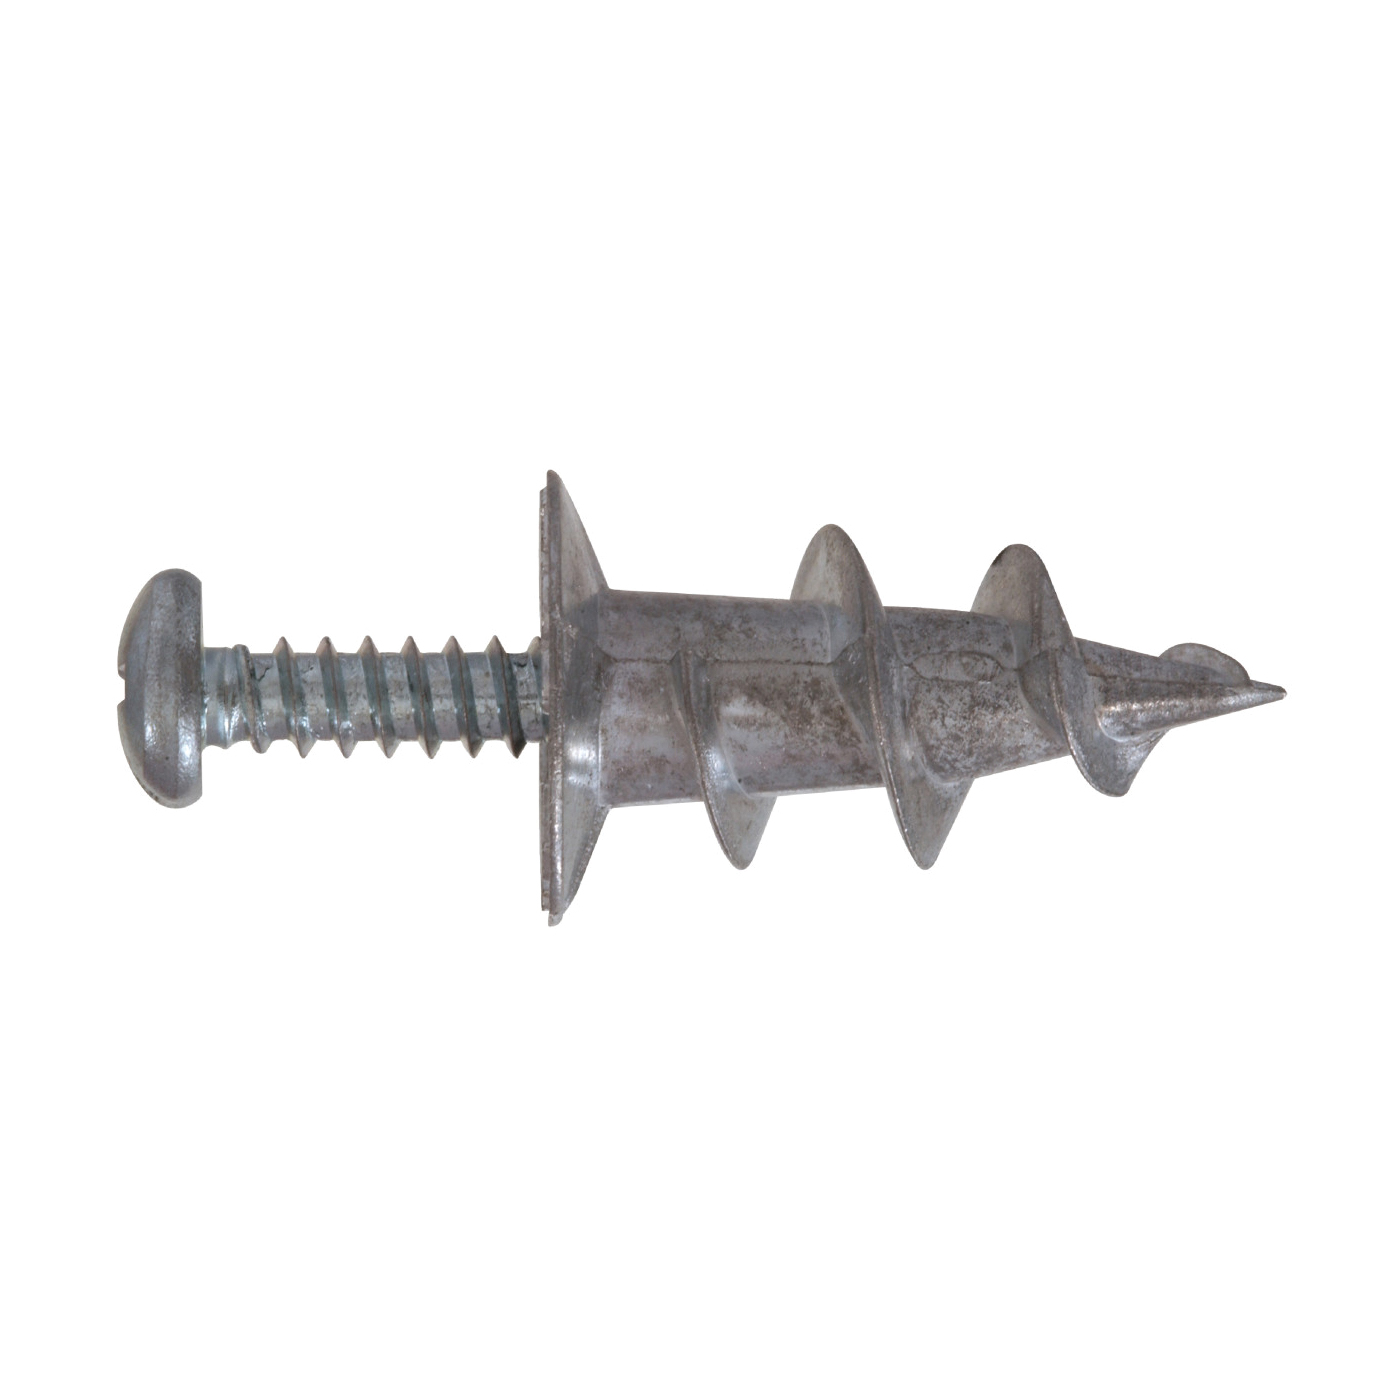 376232 Hollow Wall Anchor, 1-1/4 in L, Steel, 50 lb